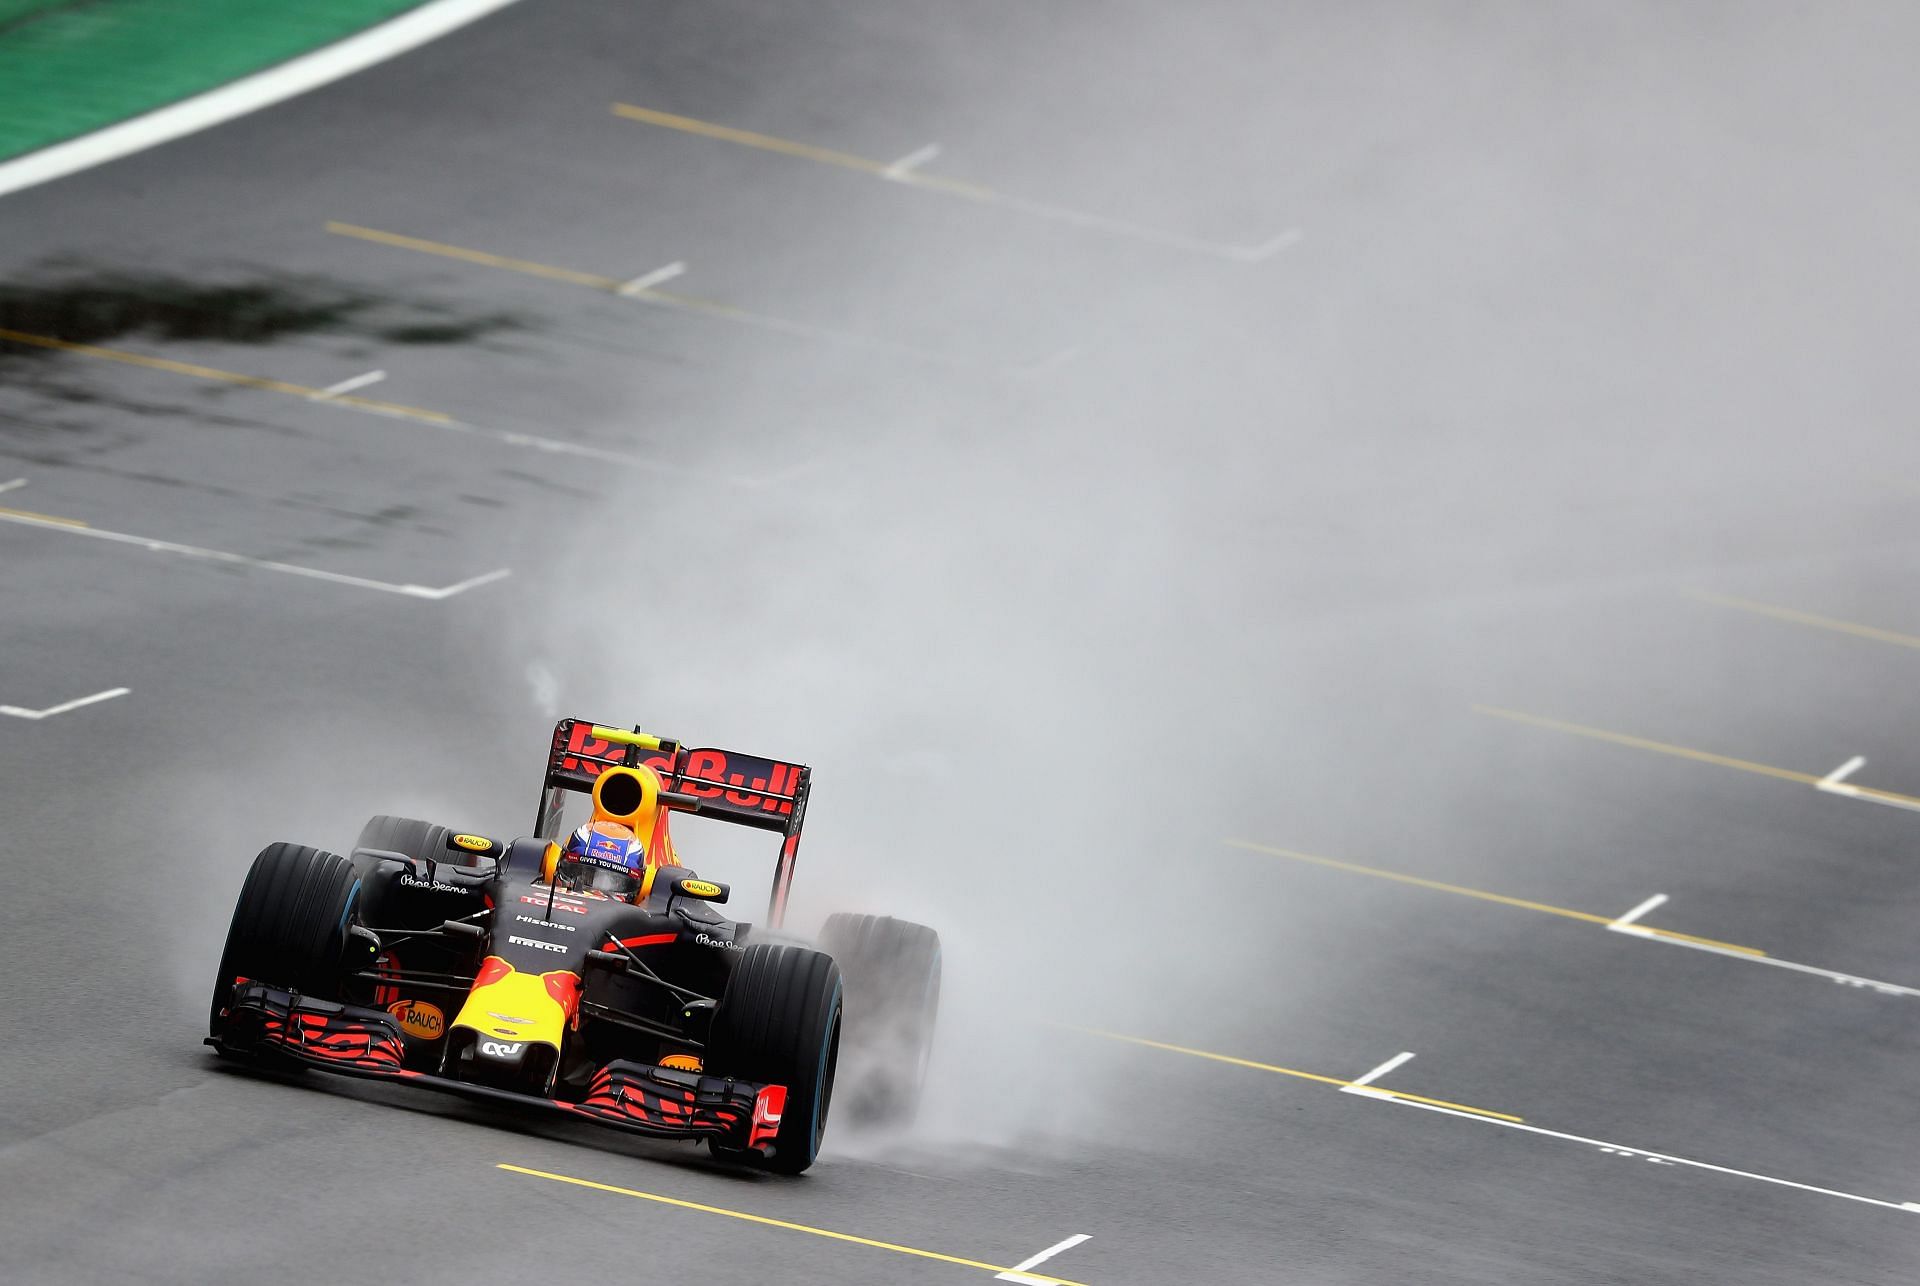 Max Verstappen giving a masterclass in wet weather at the 2016 Brazil Grand Prix in Sao Paolo (Photo by Clive Mason/Getty Images)